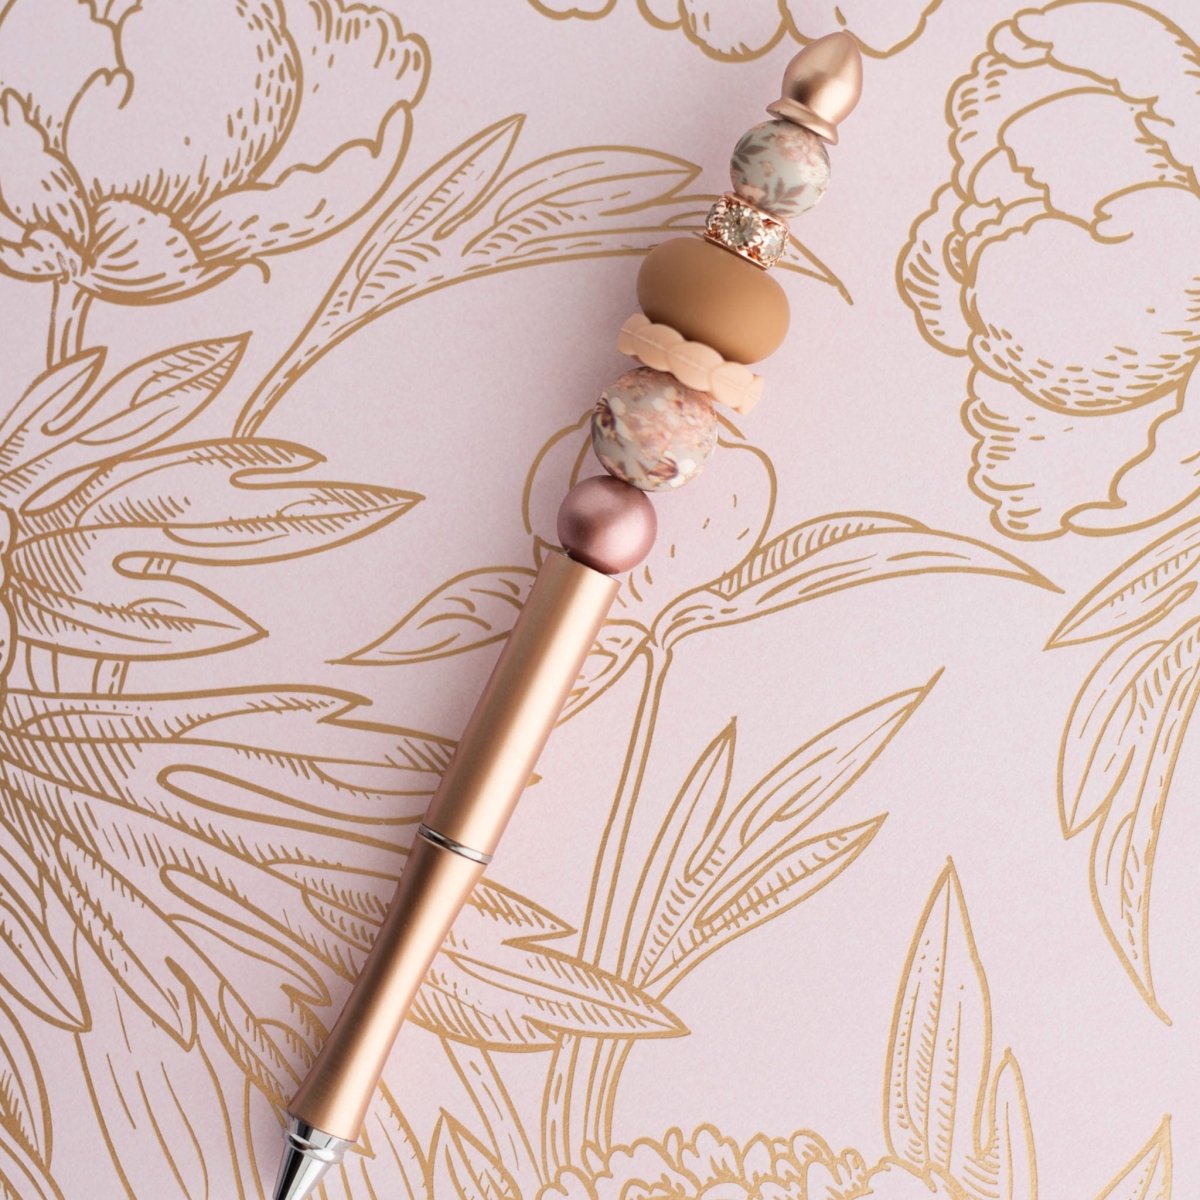 Shop the Image Delicate Floral Pen from Cara & Co Craft Supply